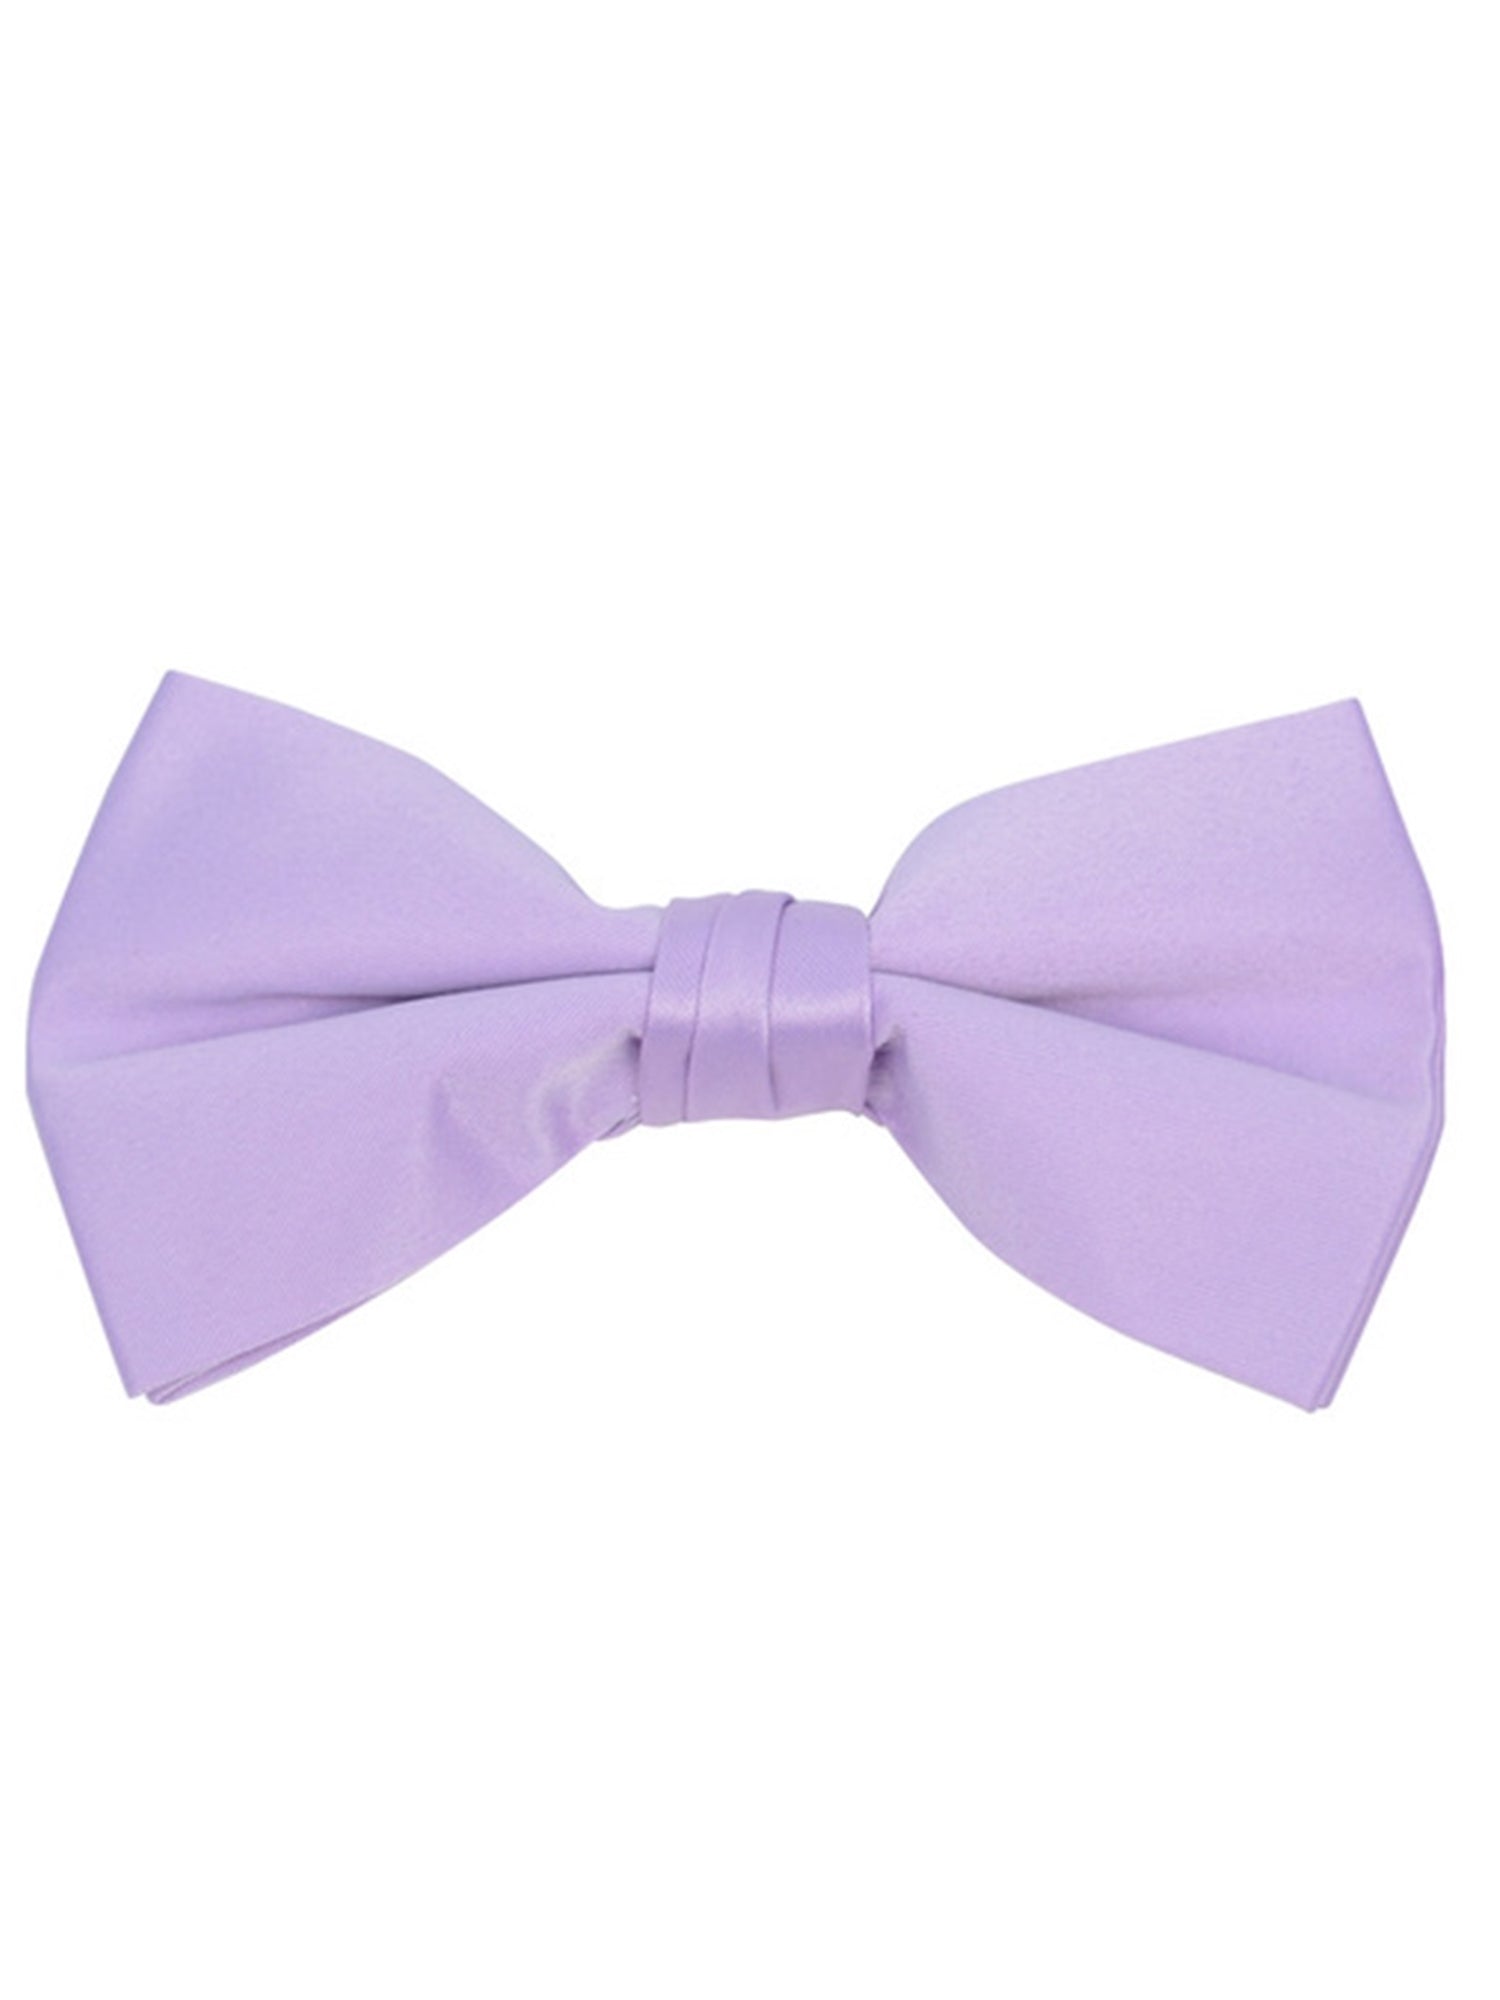 Young Boy's Pre-tied Clip On Bow Tie - Formal Tuxedo Solid Color Boy's Solid Color Bow Tie TheDapperTie Lavender One Size 